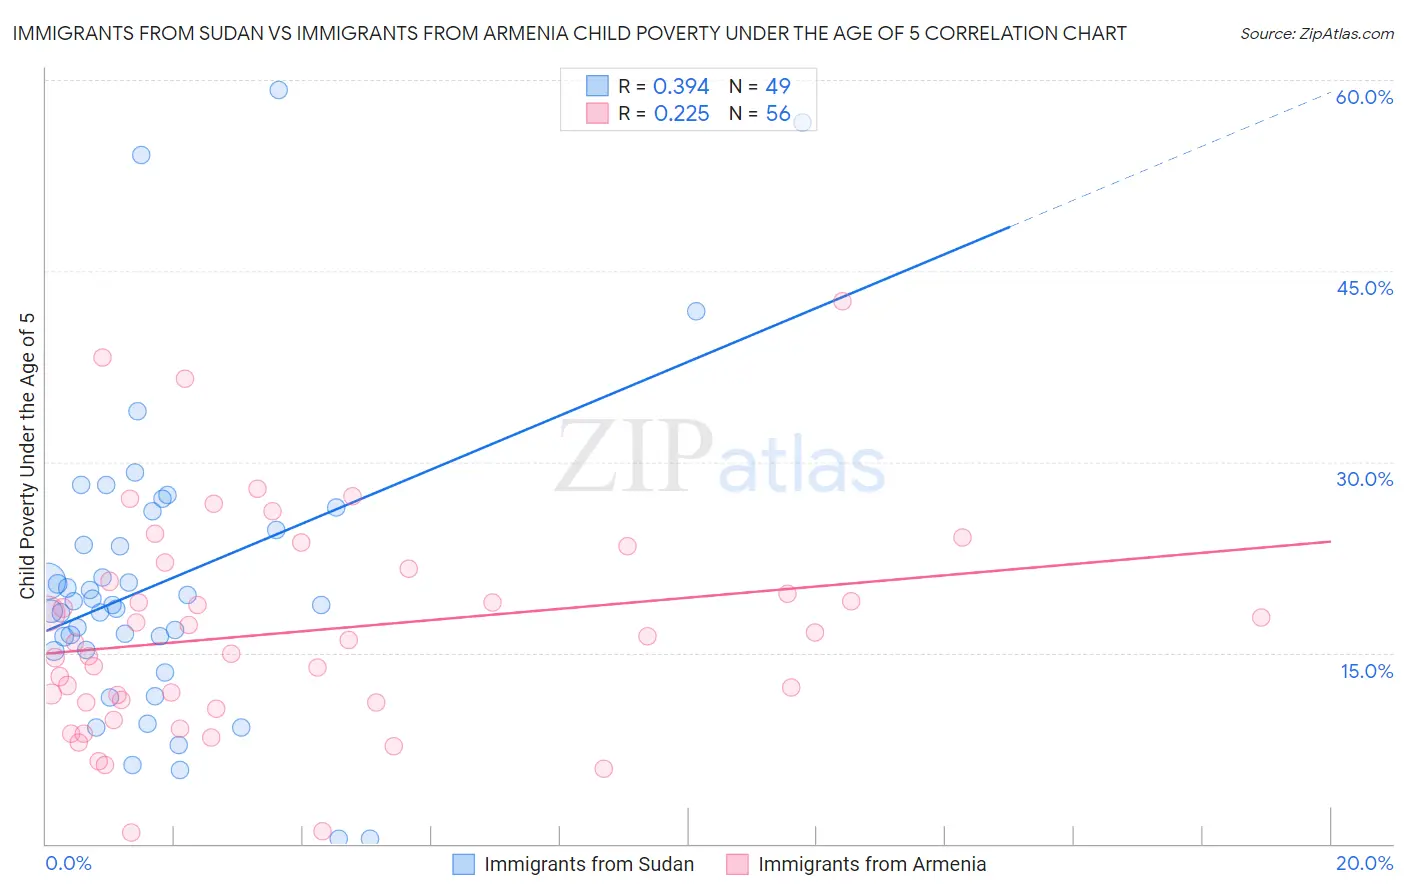 Immigrants from Sudan vs Immigrants from Armenia Child Poverty Under the Age of 5